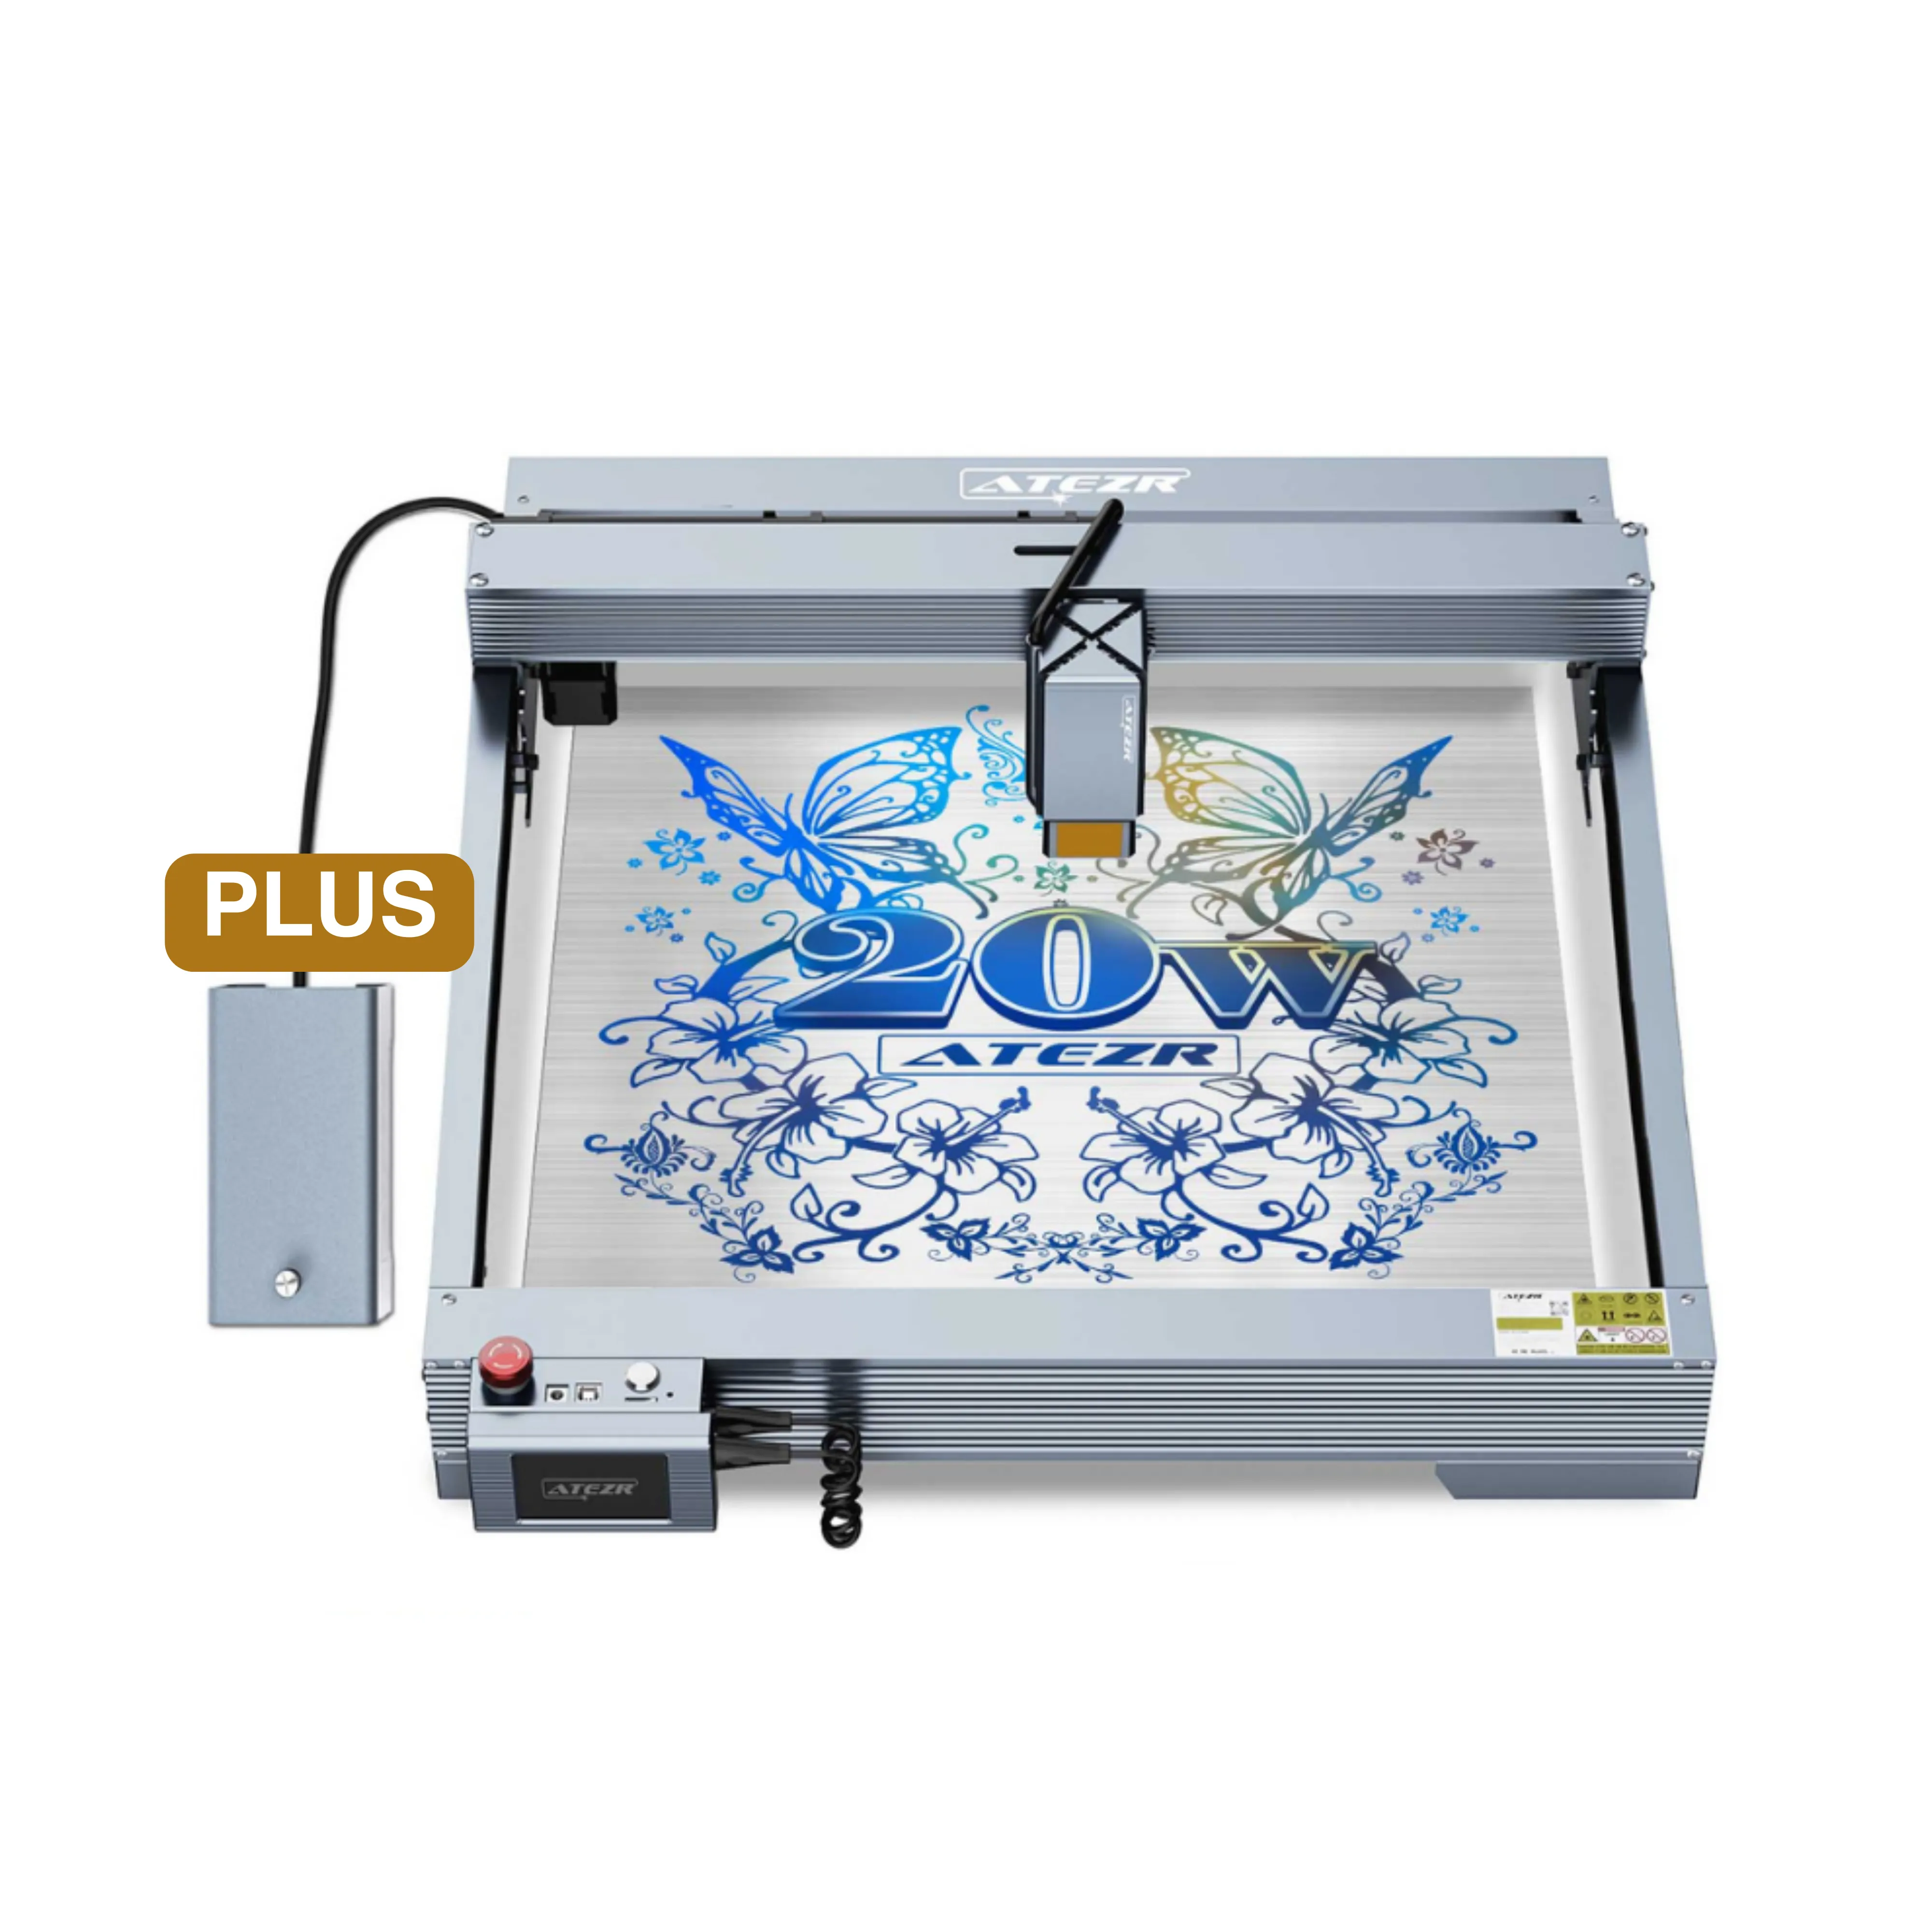 WIZMAKER L1 20W Laser Engraver Cutting Machine with Air Assist